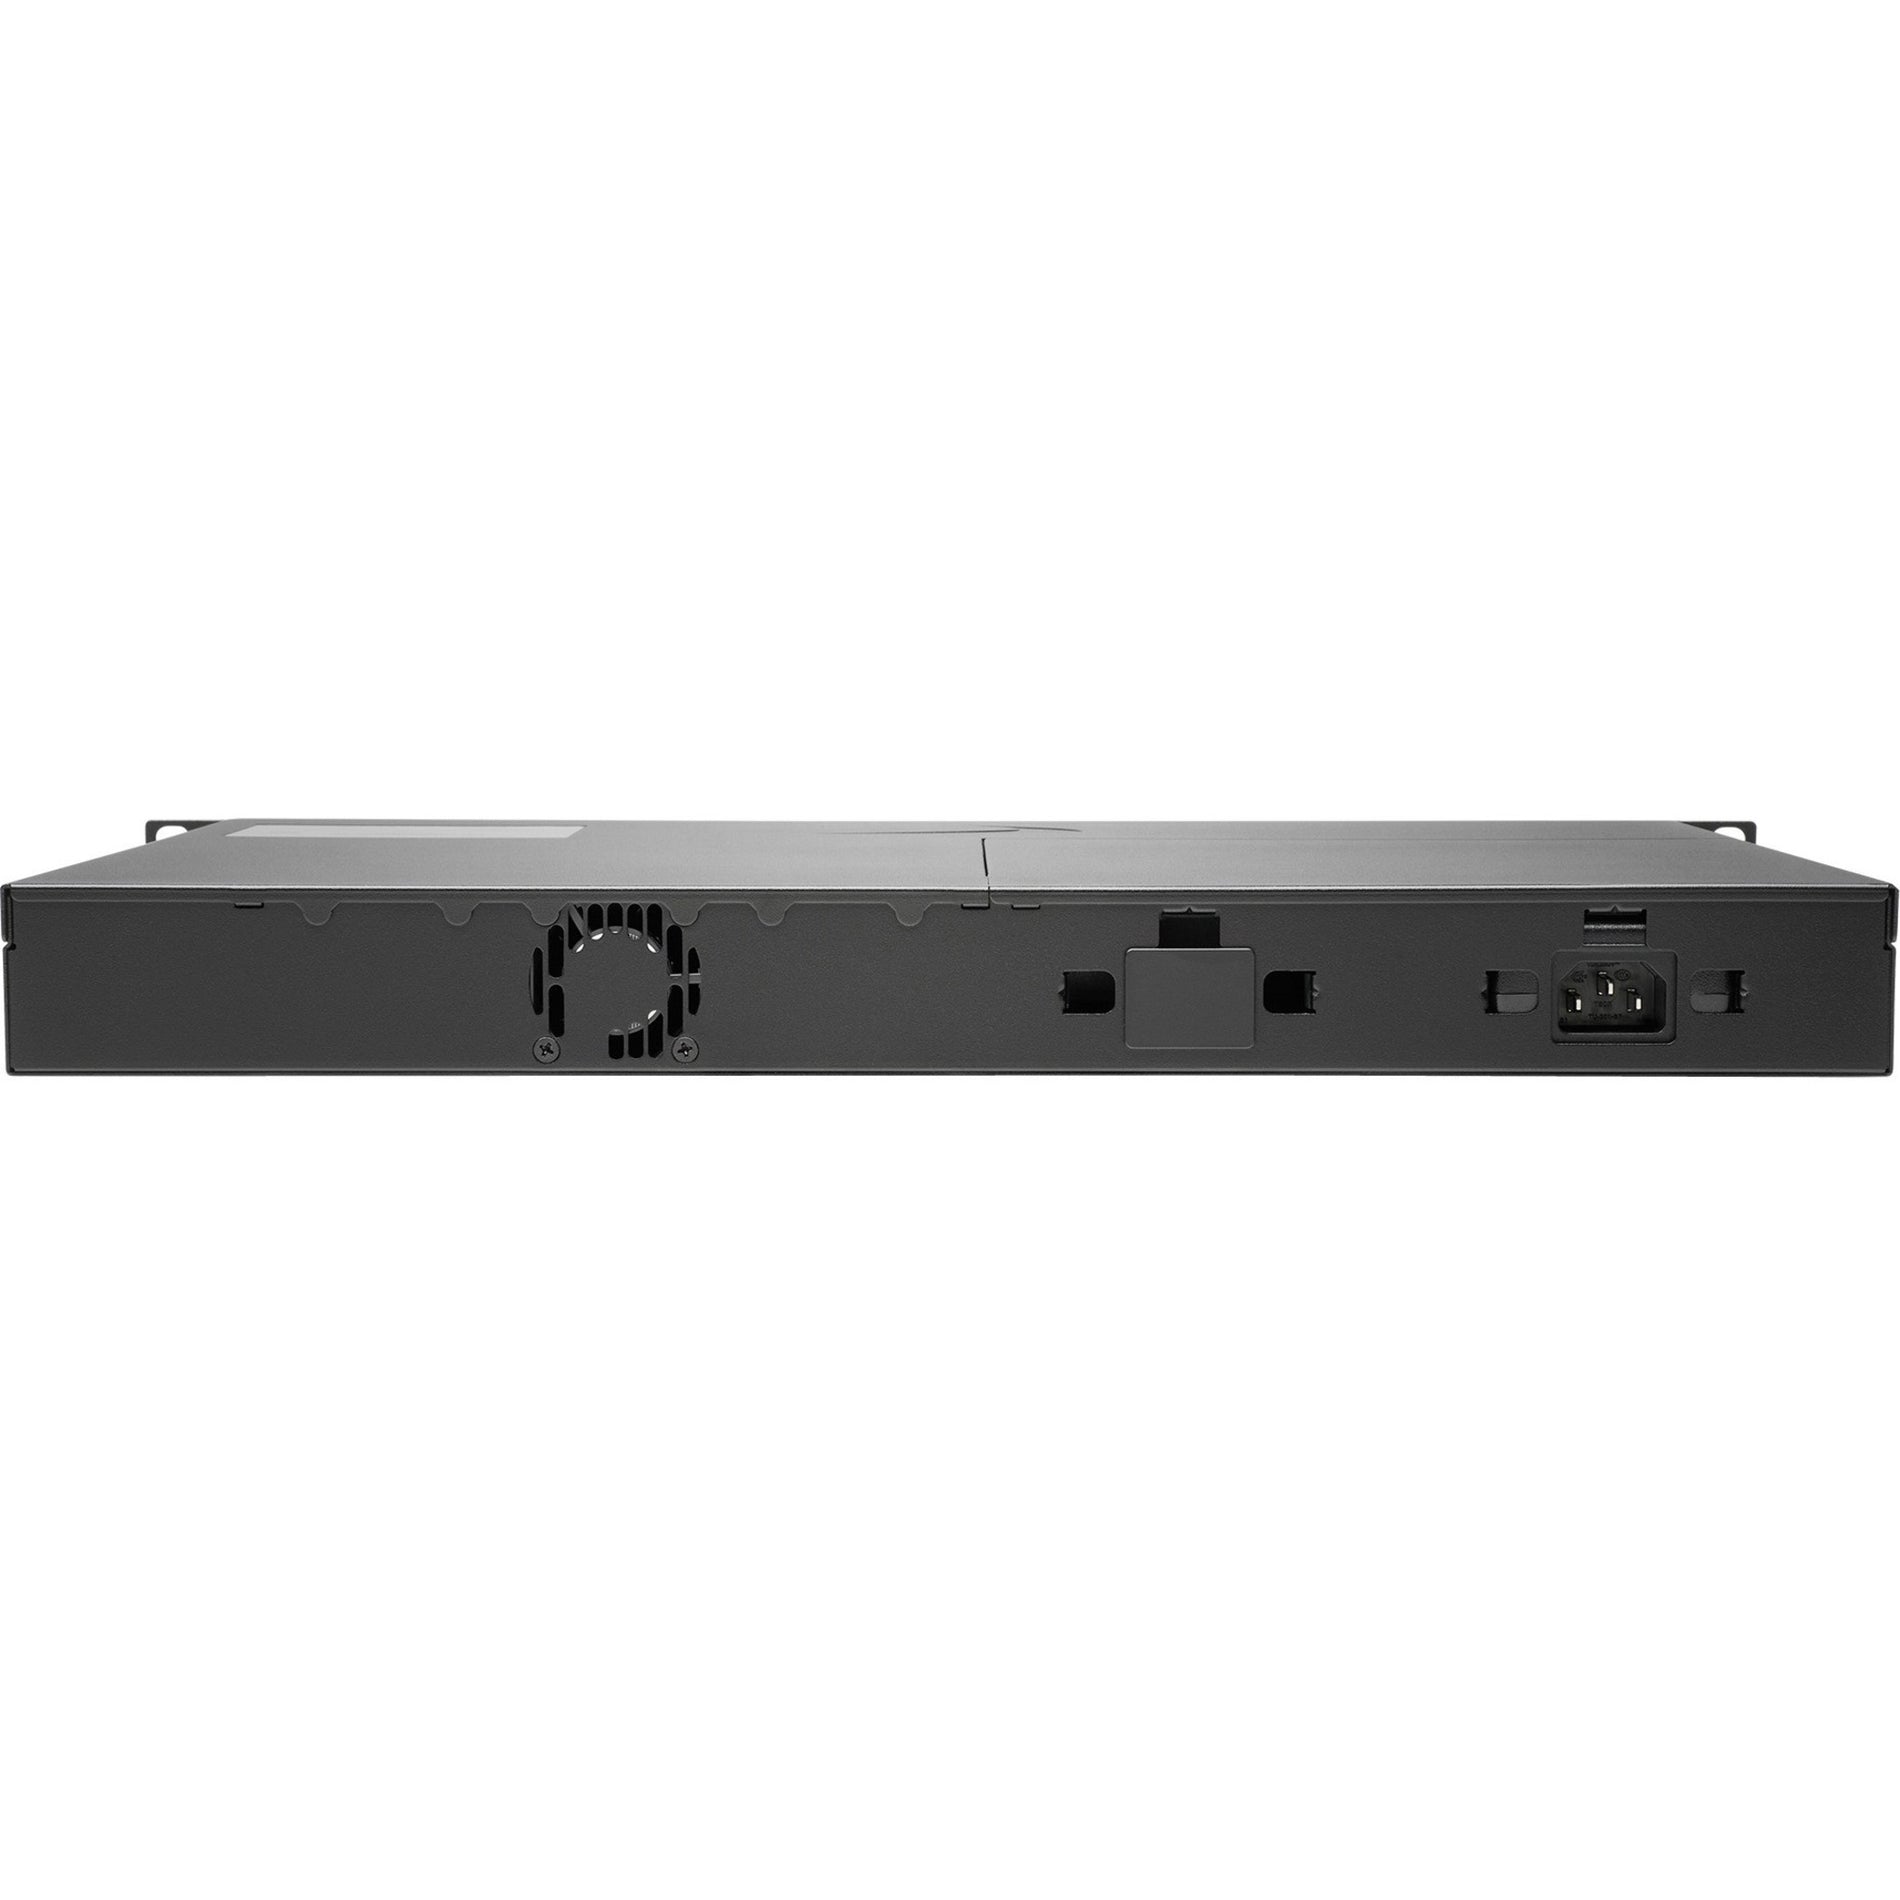 SonicWall 02-SSC-8718 NSA 3700 Network Security/Firewall Appliance, 24 Ports, TotalSecure Advanced Edition